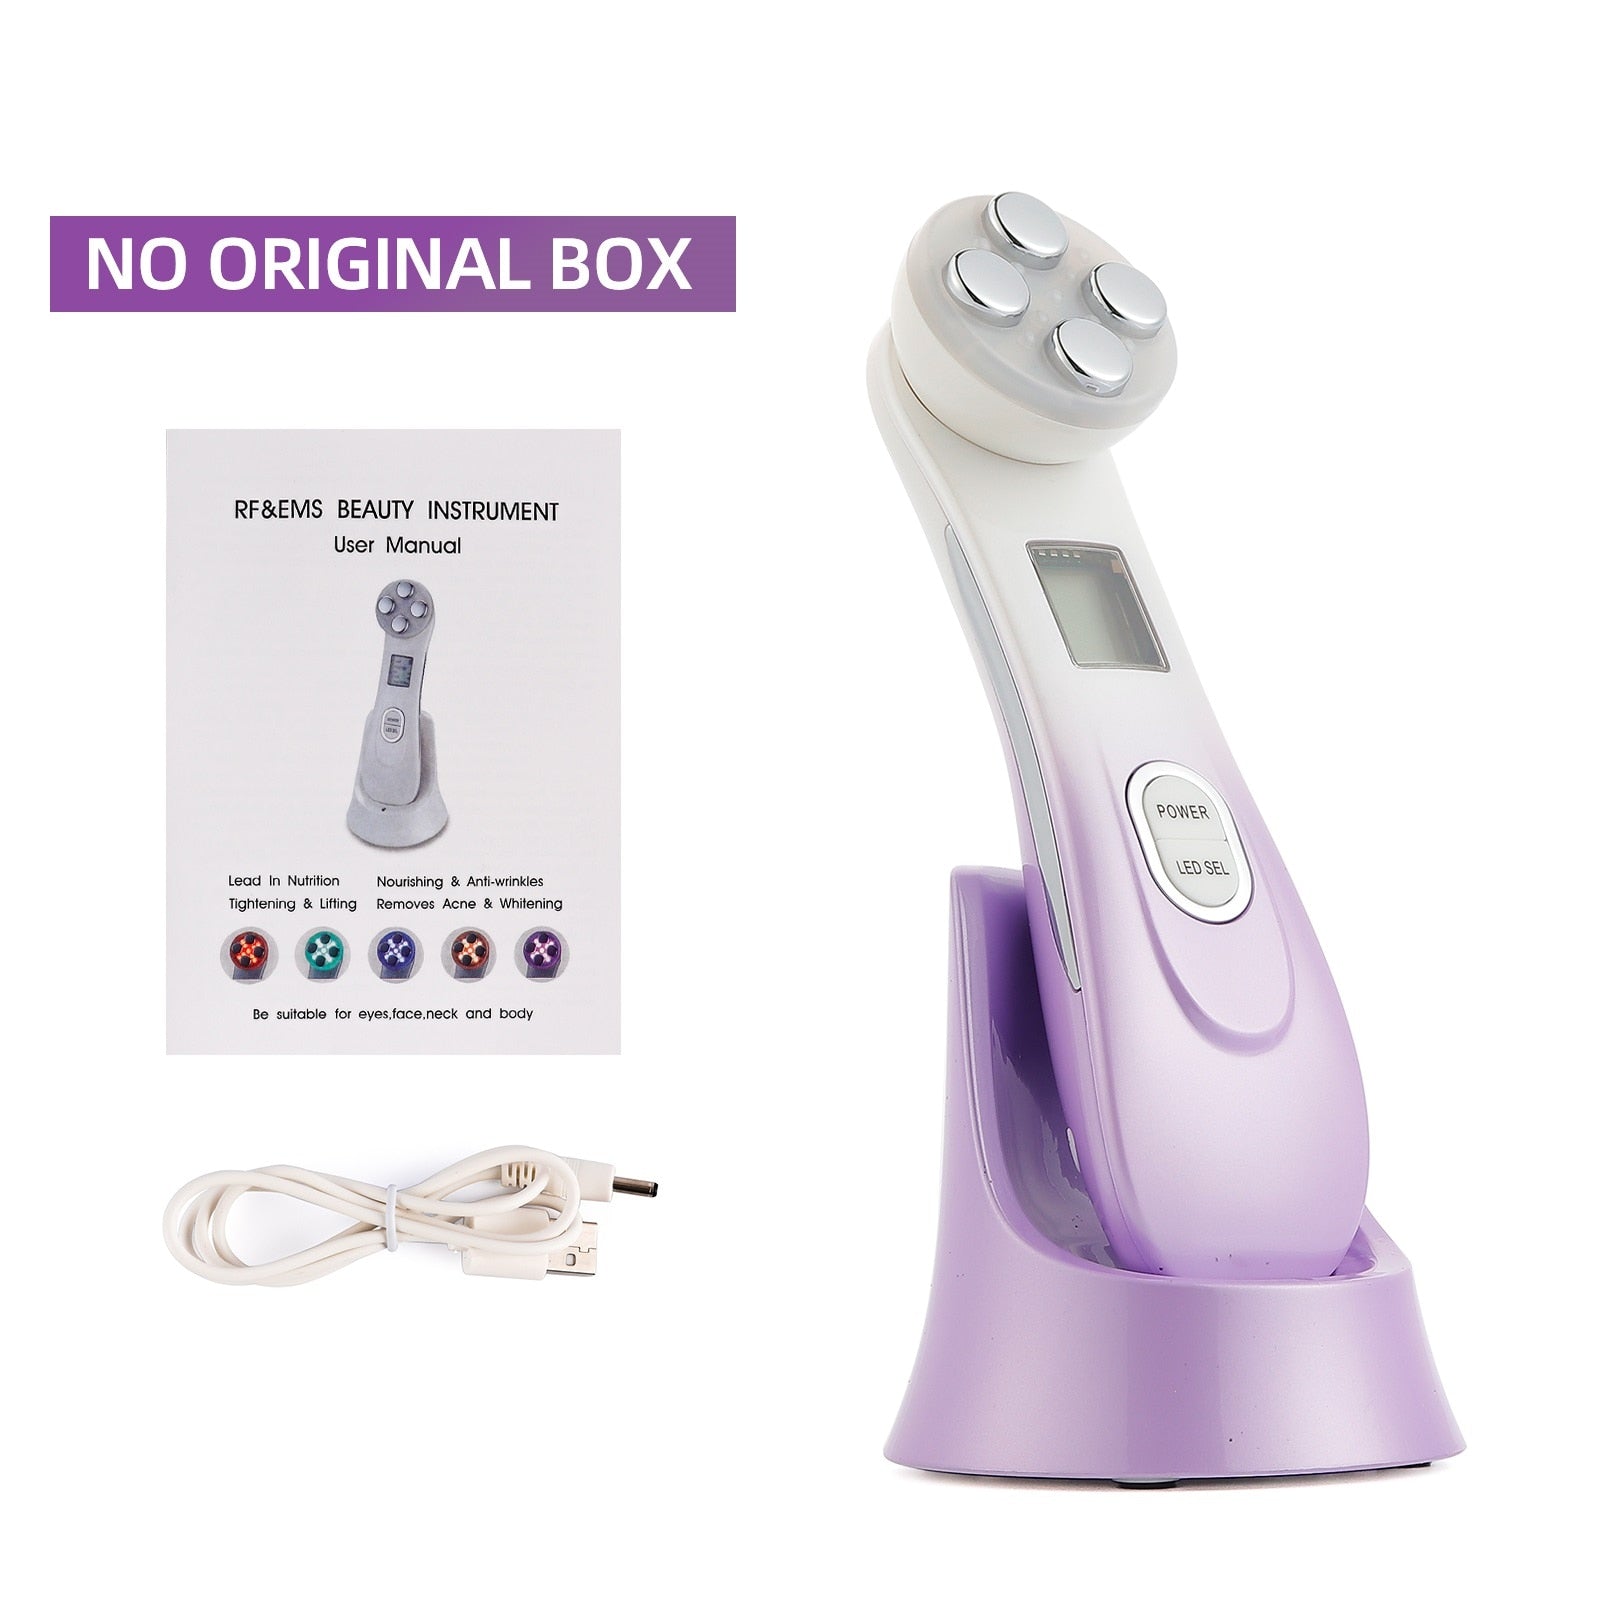 Facial Mesotherapy Electroporation RF Radio Frequency LED Photon Face Lifting Tighten Wrinkle Removal Skin Care Face Massager